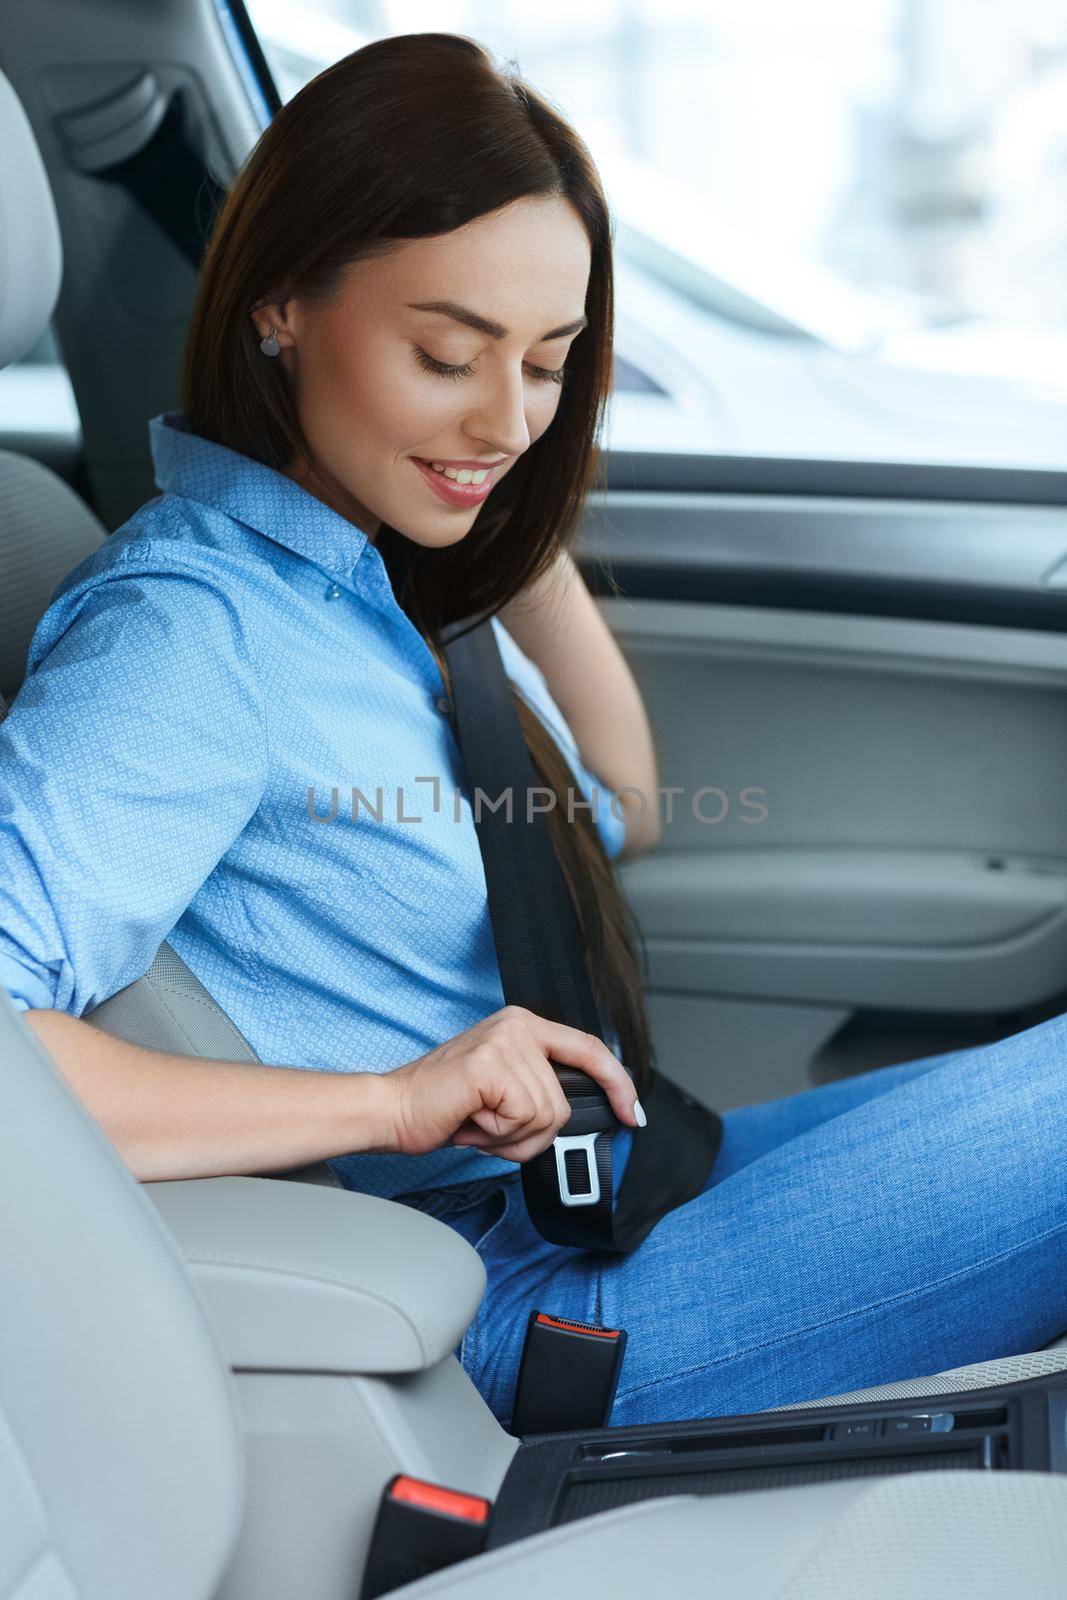 Safety on point. Vertical Shot of a beautiful woman sitting in a car putting her seatbelt on smiling joyfully